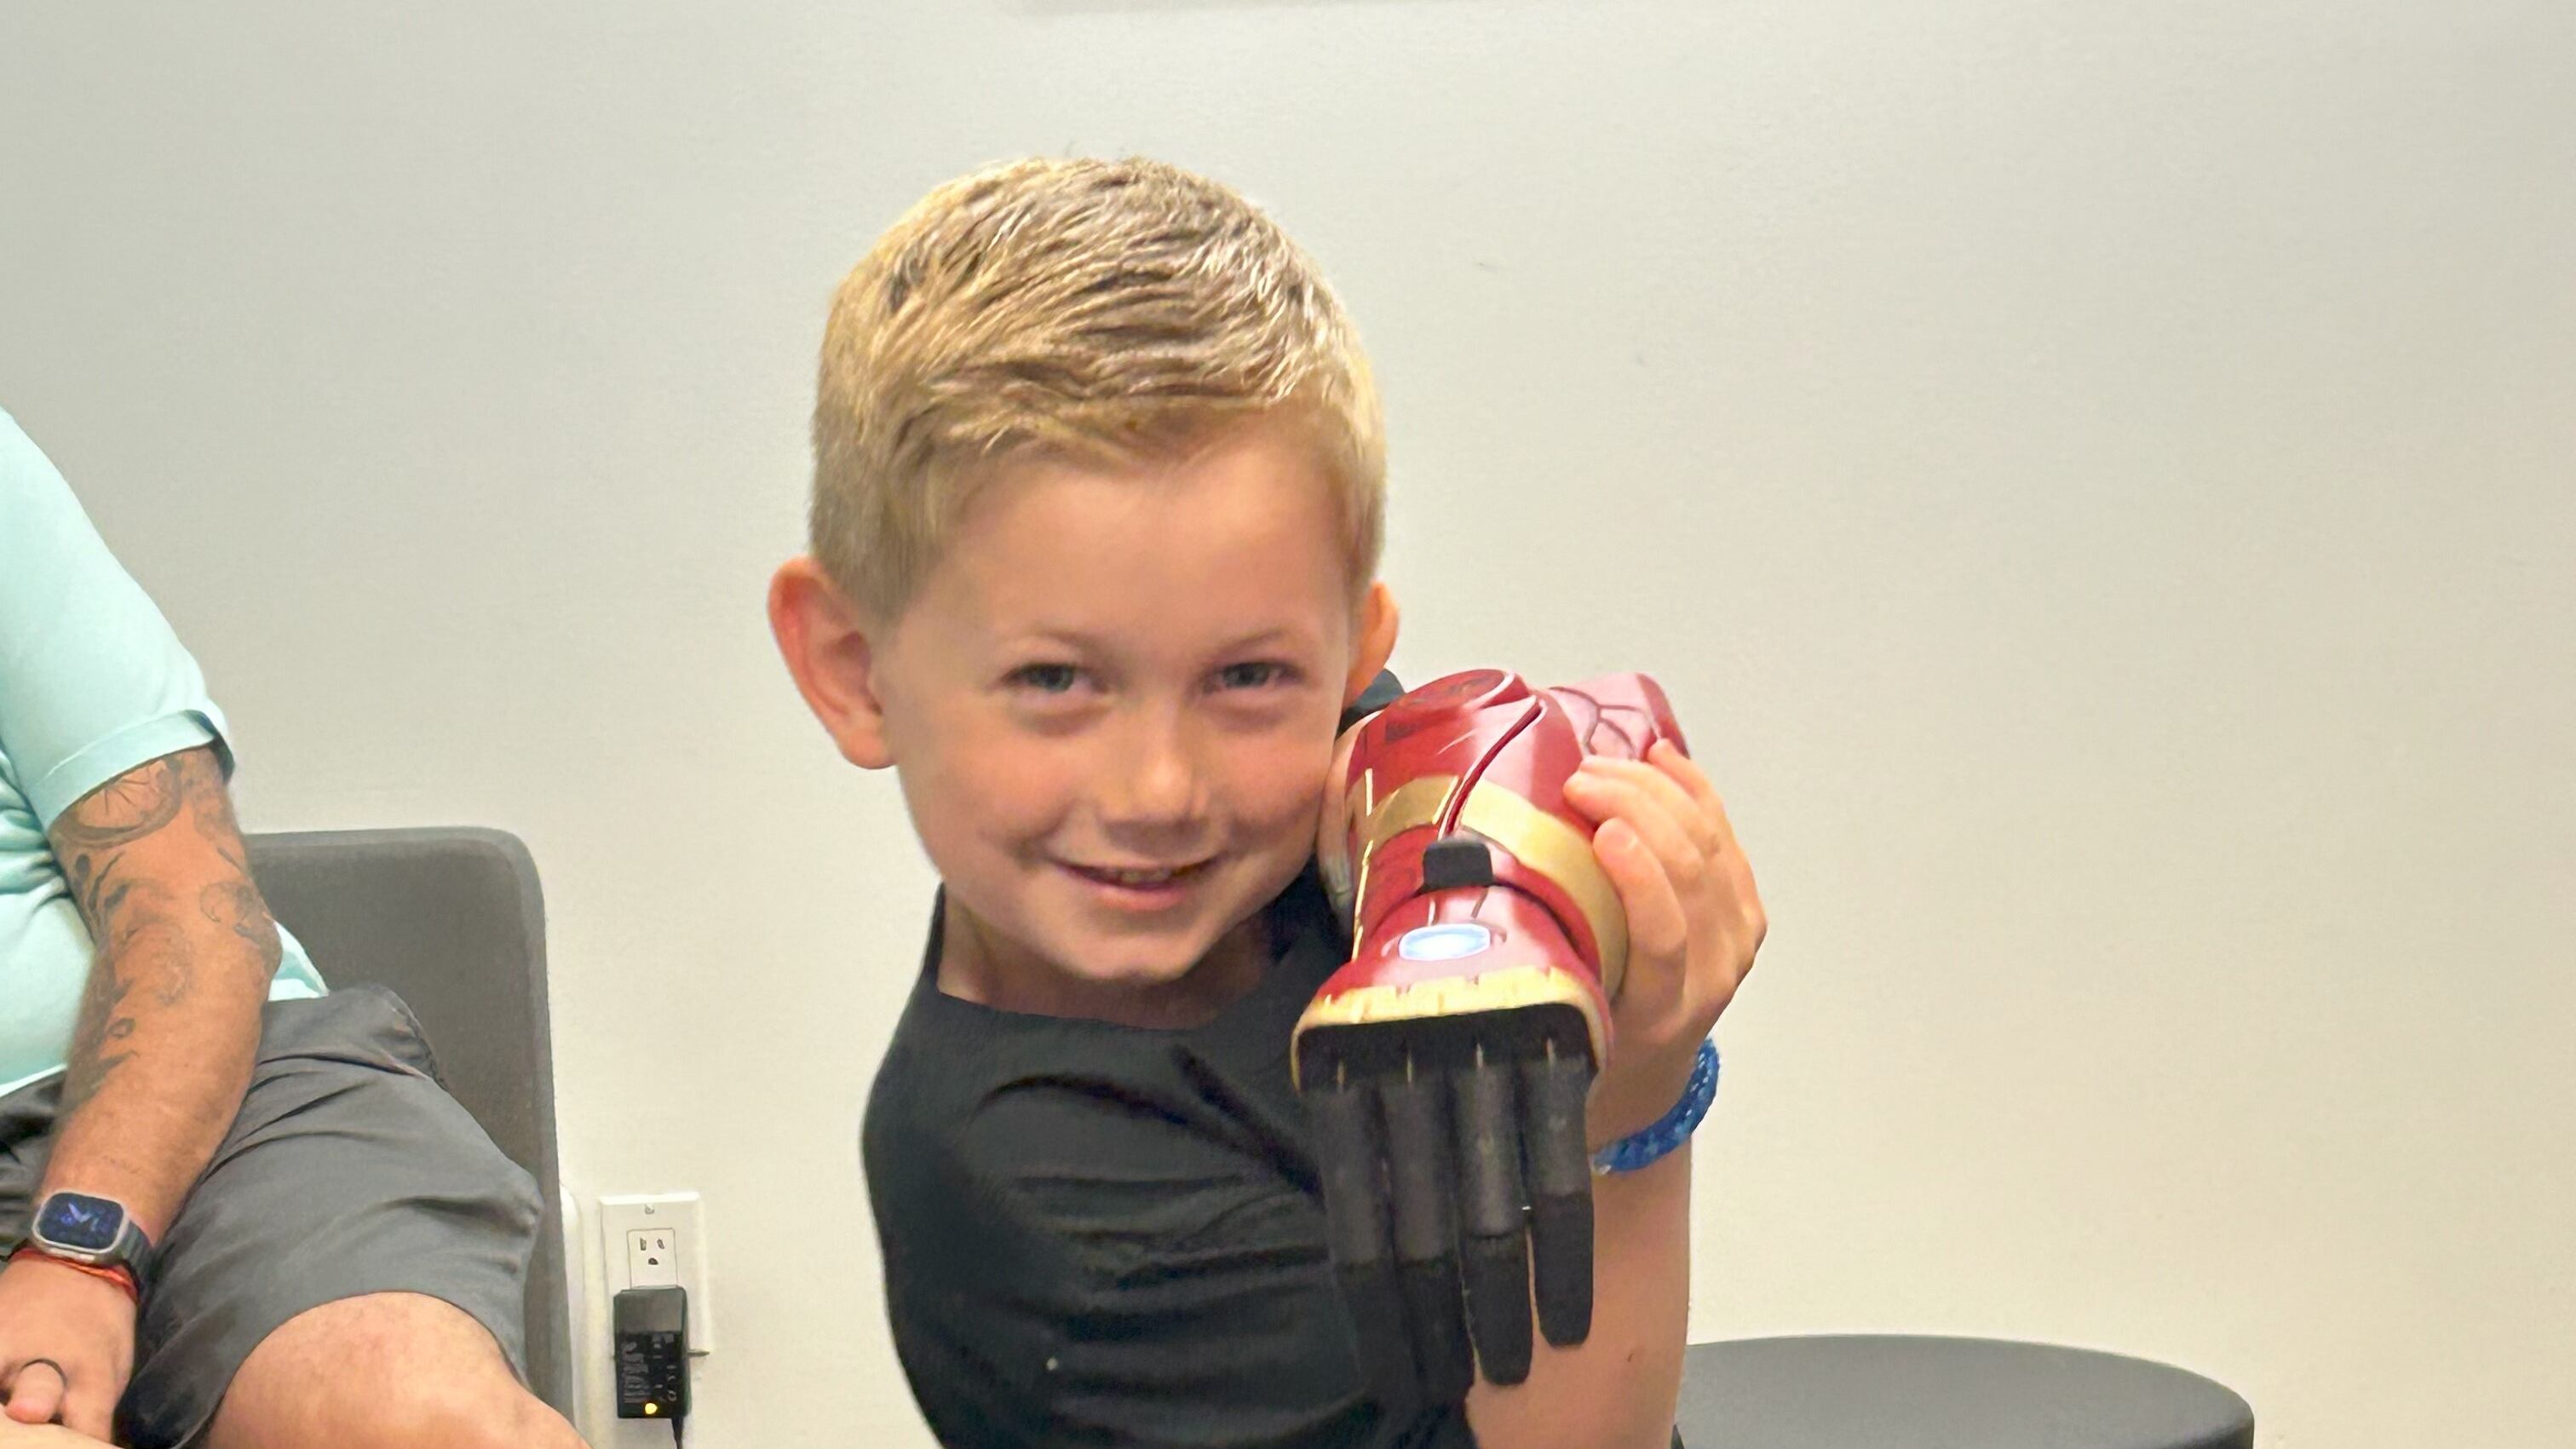 Jordan Marotta, five, has become the youngest person in the world to get a bionic Hero Arm